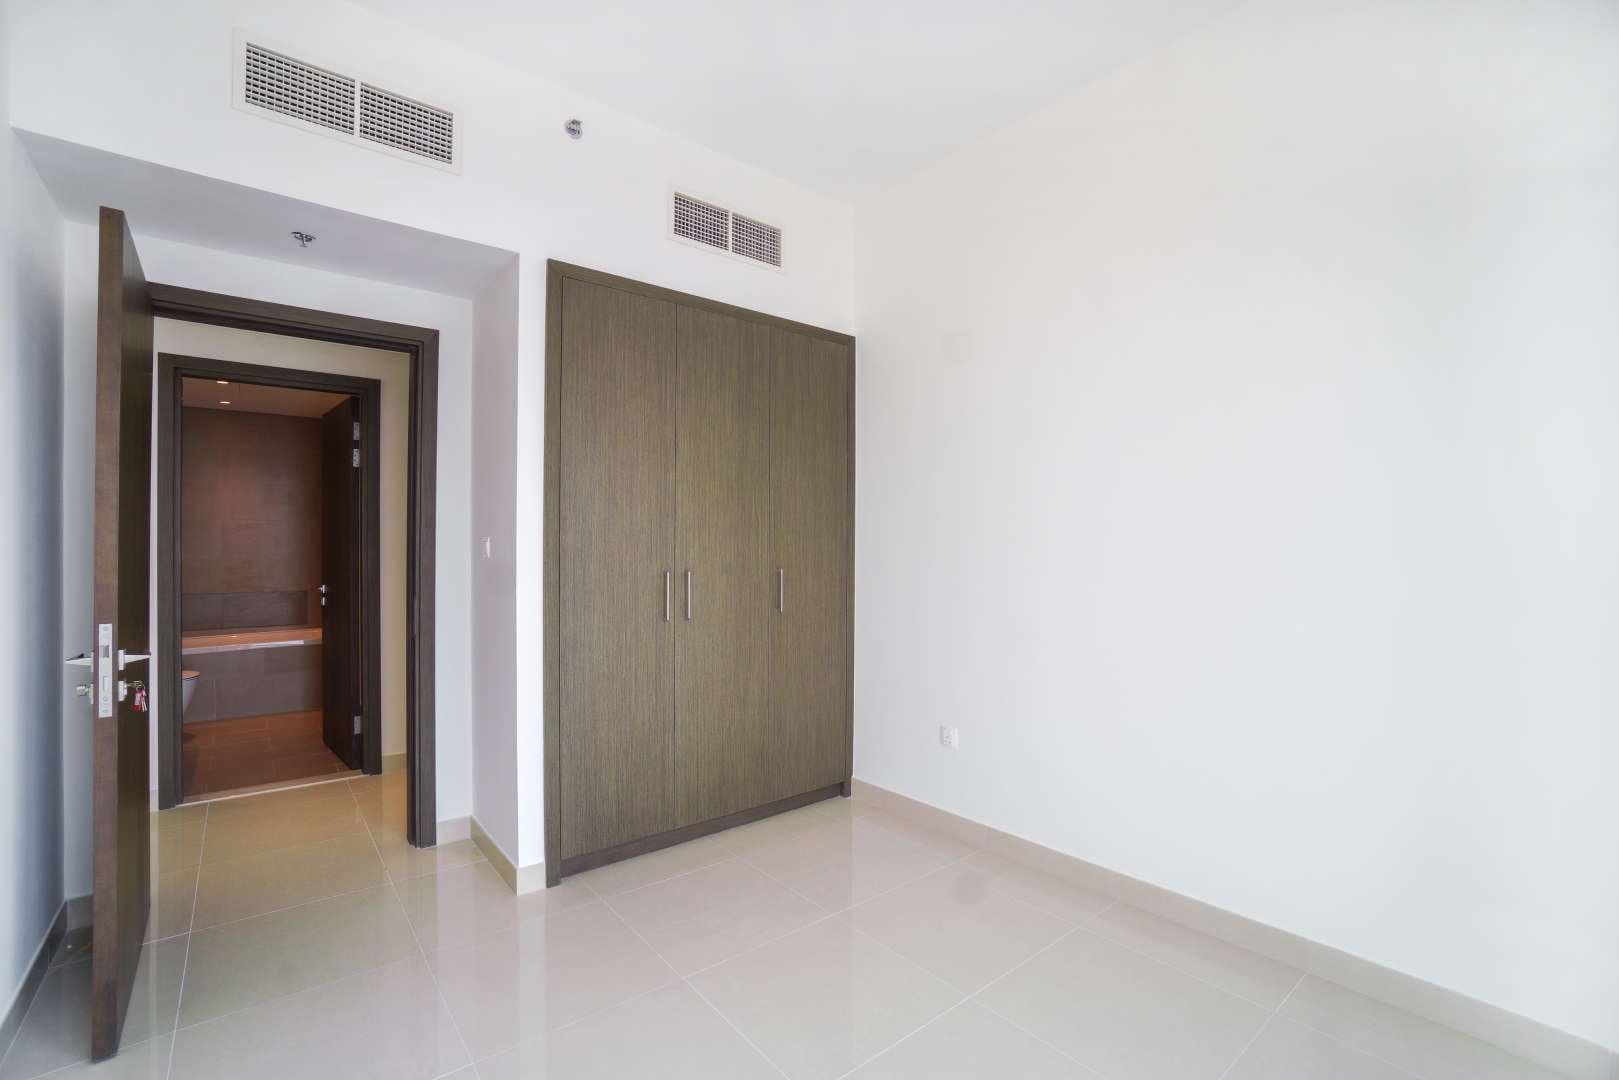 2 Bedroom Apartment For Rent Harbour Views 2 Lp09365 22bf5b60a3408200.jpg